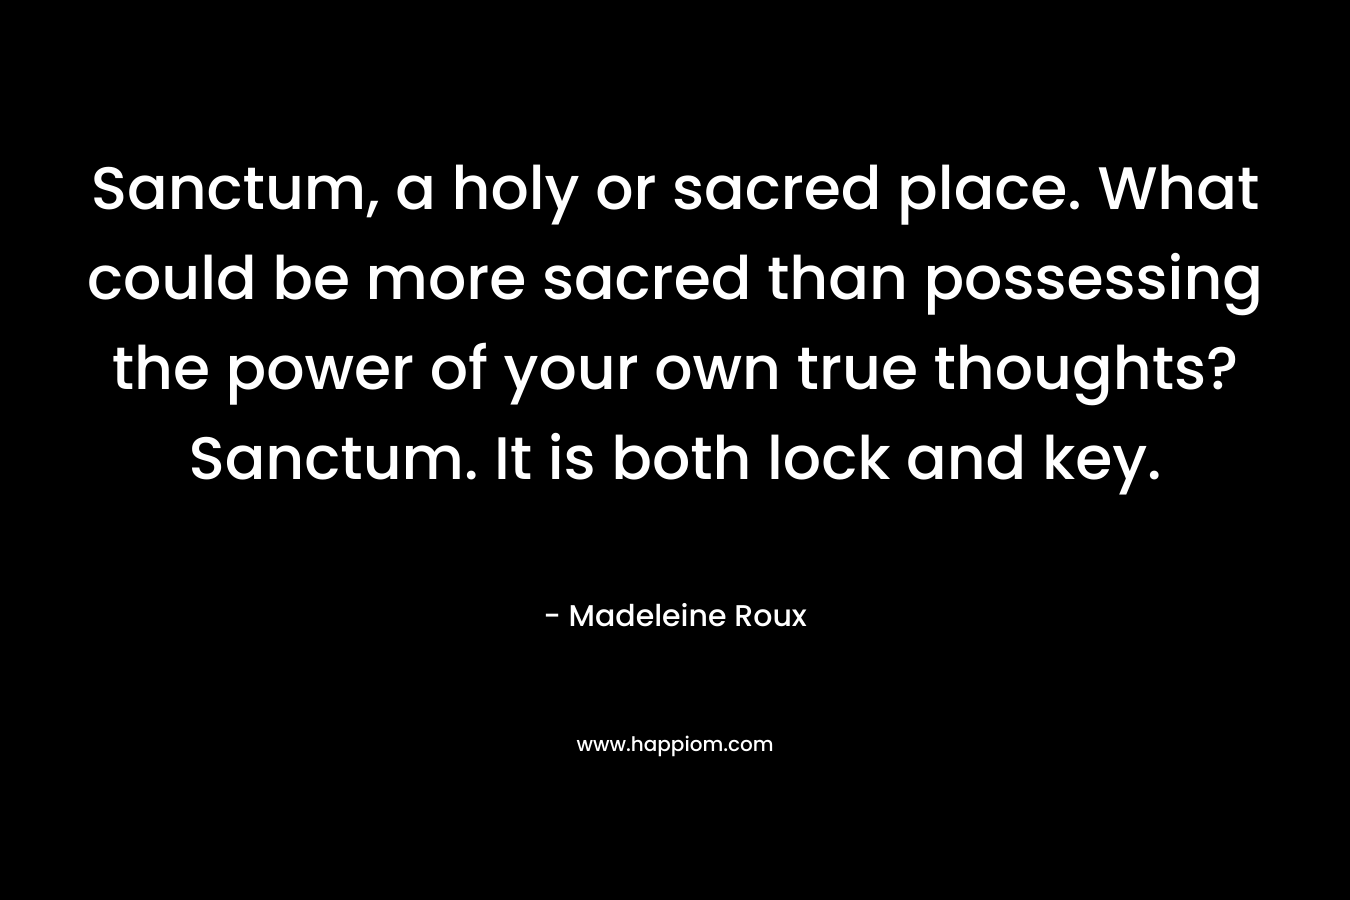 Sanctum, a holy or sacred place. What could be more sacred than possessing the power of your own true thoughts? Sanctum. It is both lock and key. – Madeleine Roux